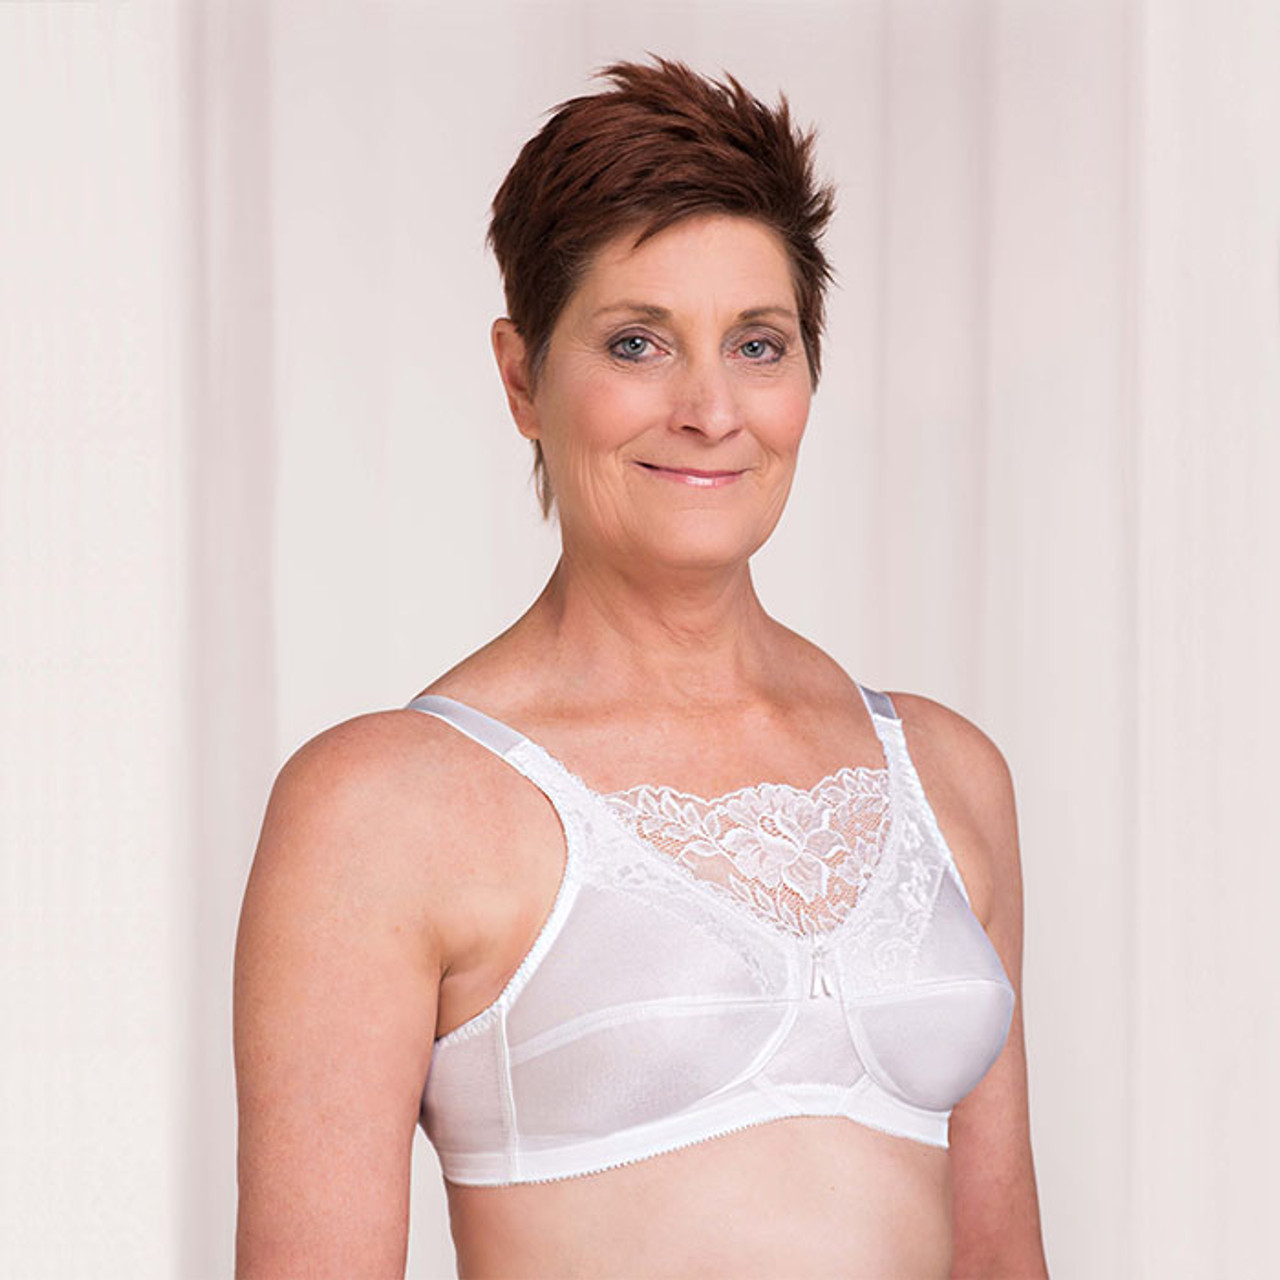 Lace Trim Mastectomy Camisole With Built-In Pocketed Bra With Sewn-In Foam  Cups, Adjustable Bra Straps - eMastectomy